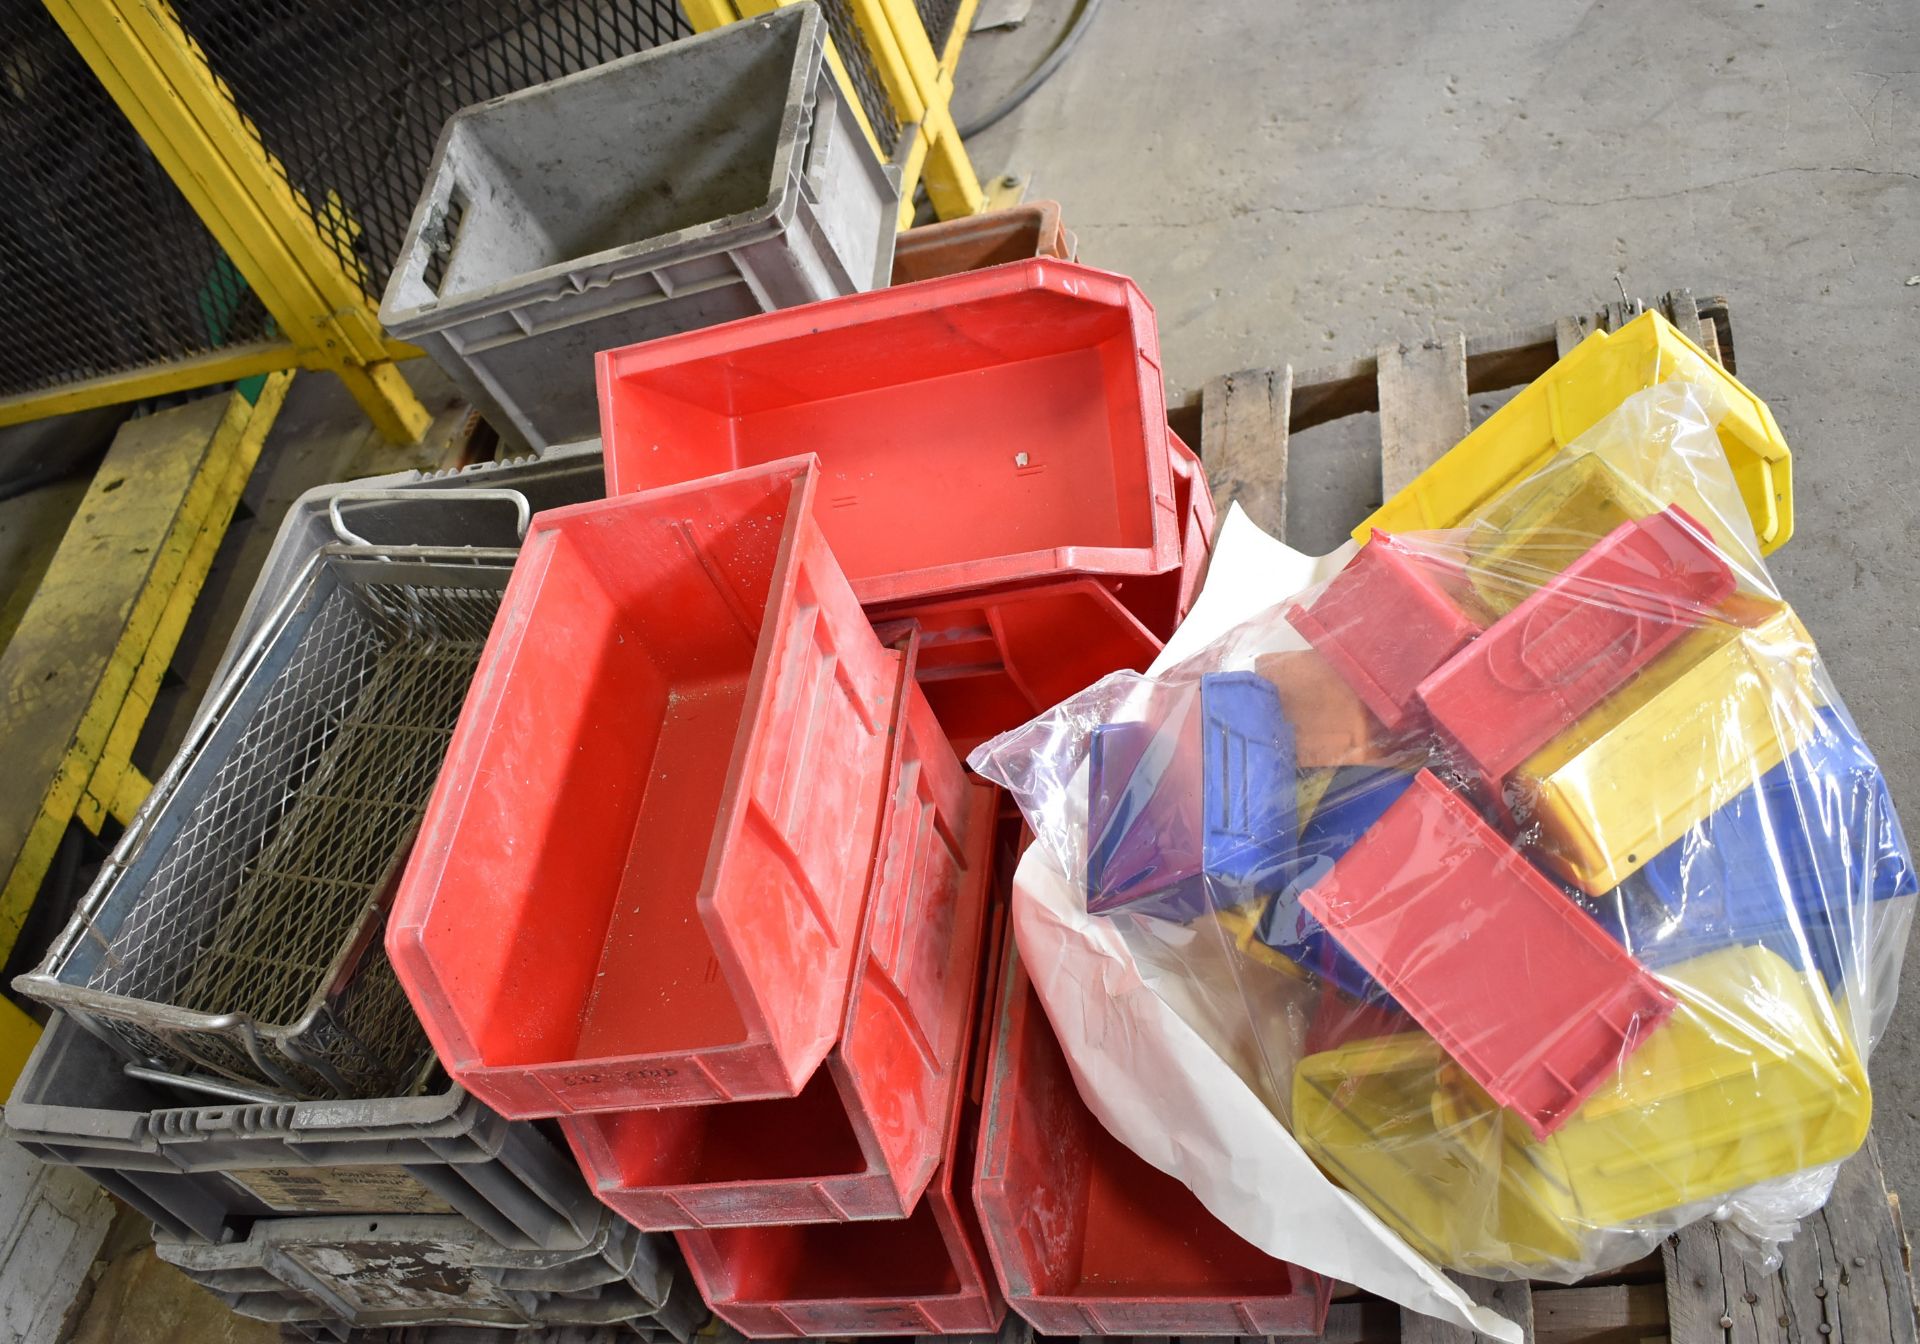 LOT/ SKIDS WITH CONTENTS - SHOP SUPPLIES, SPARE PARTS - Image 8 of 8